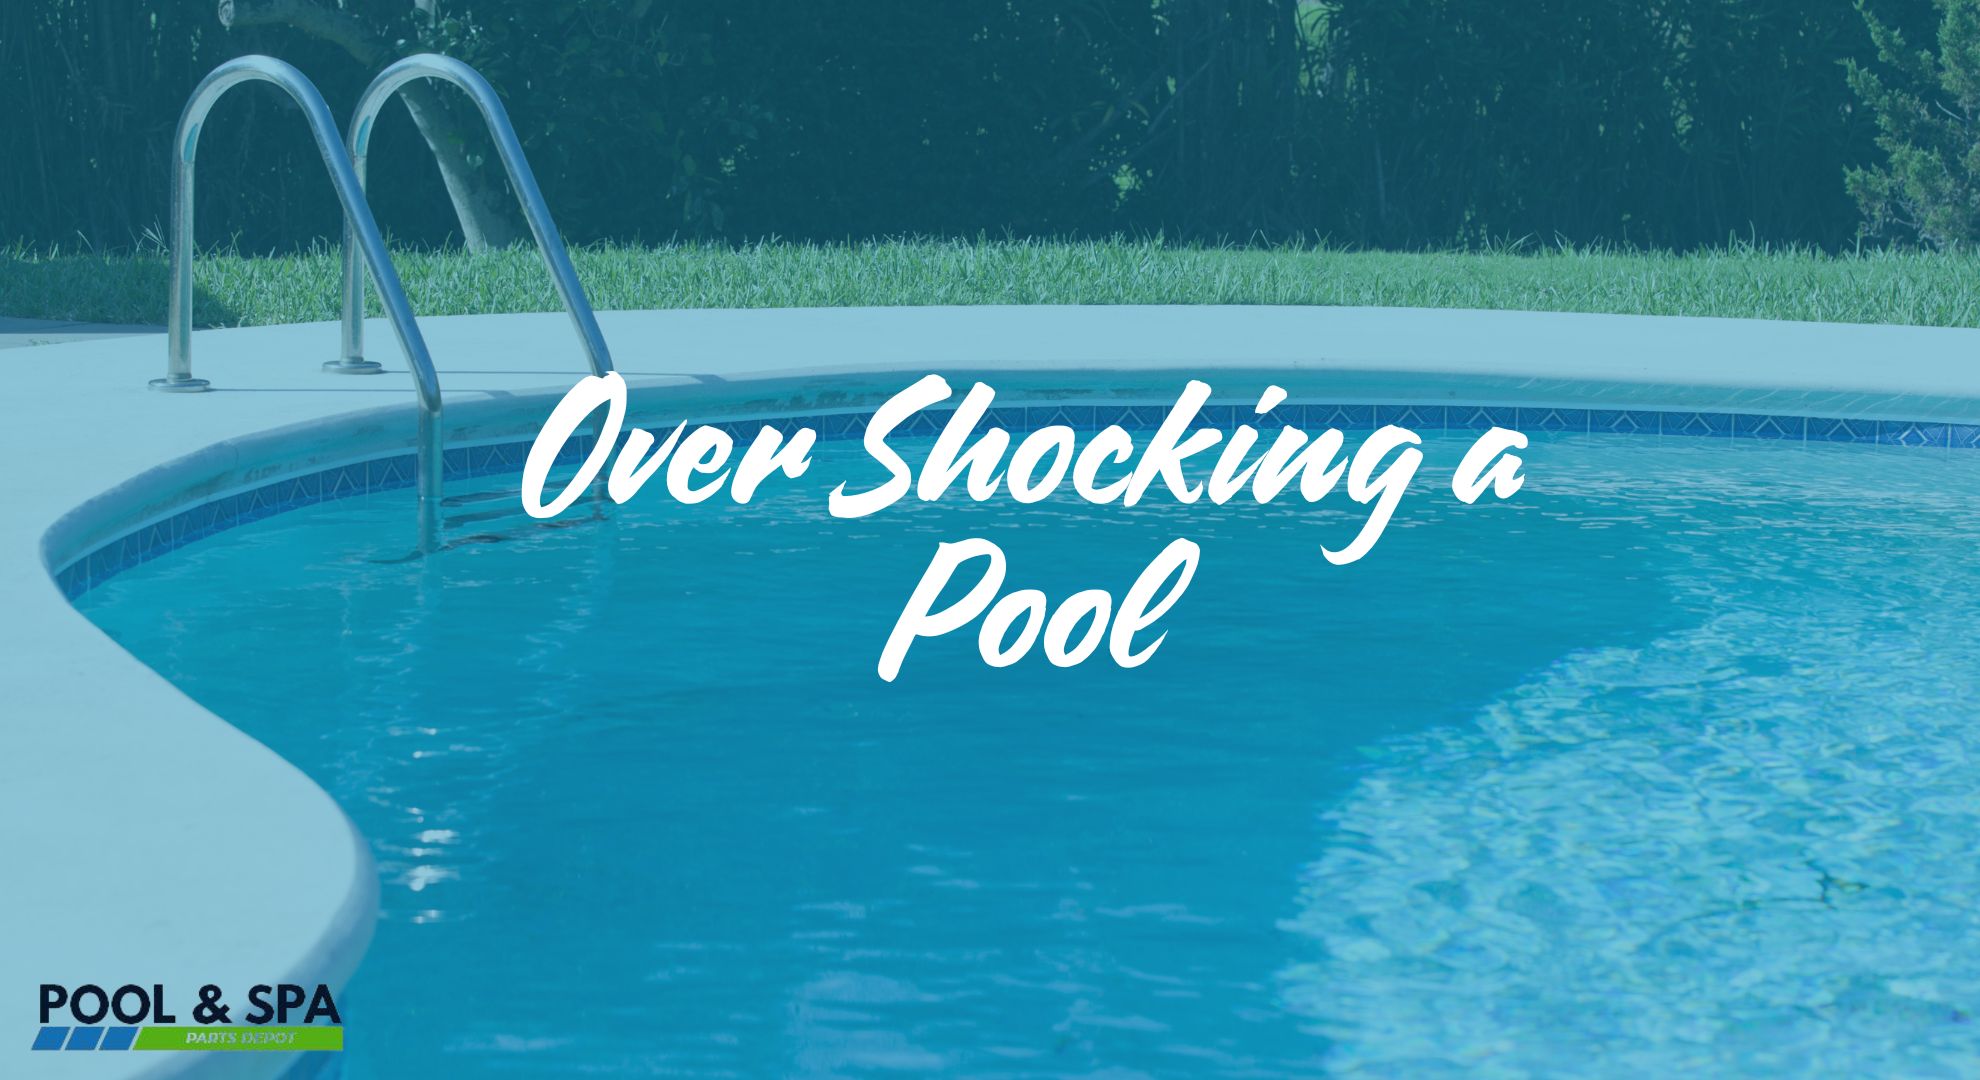 Can You Over Shock a Pool?